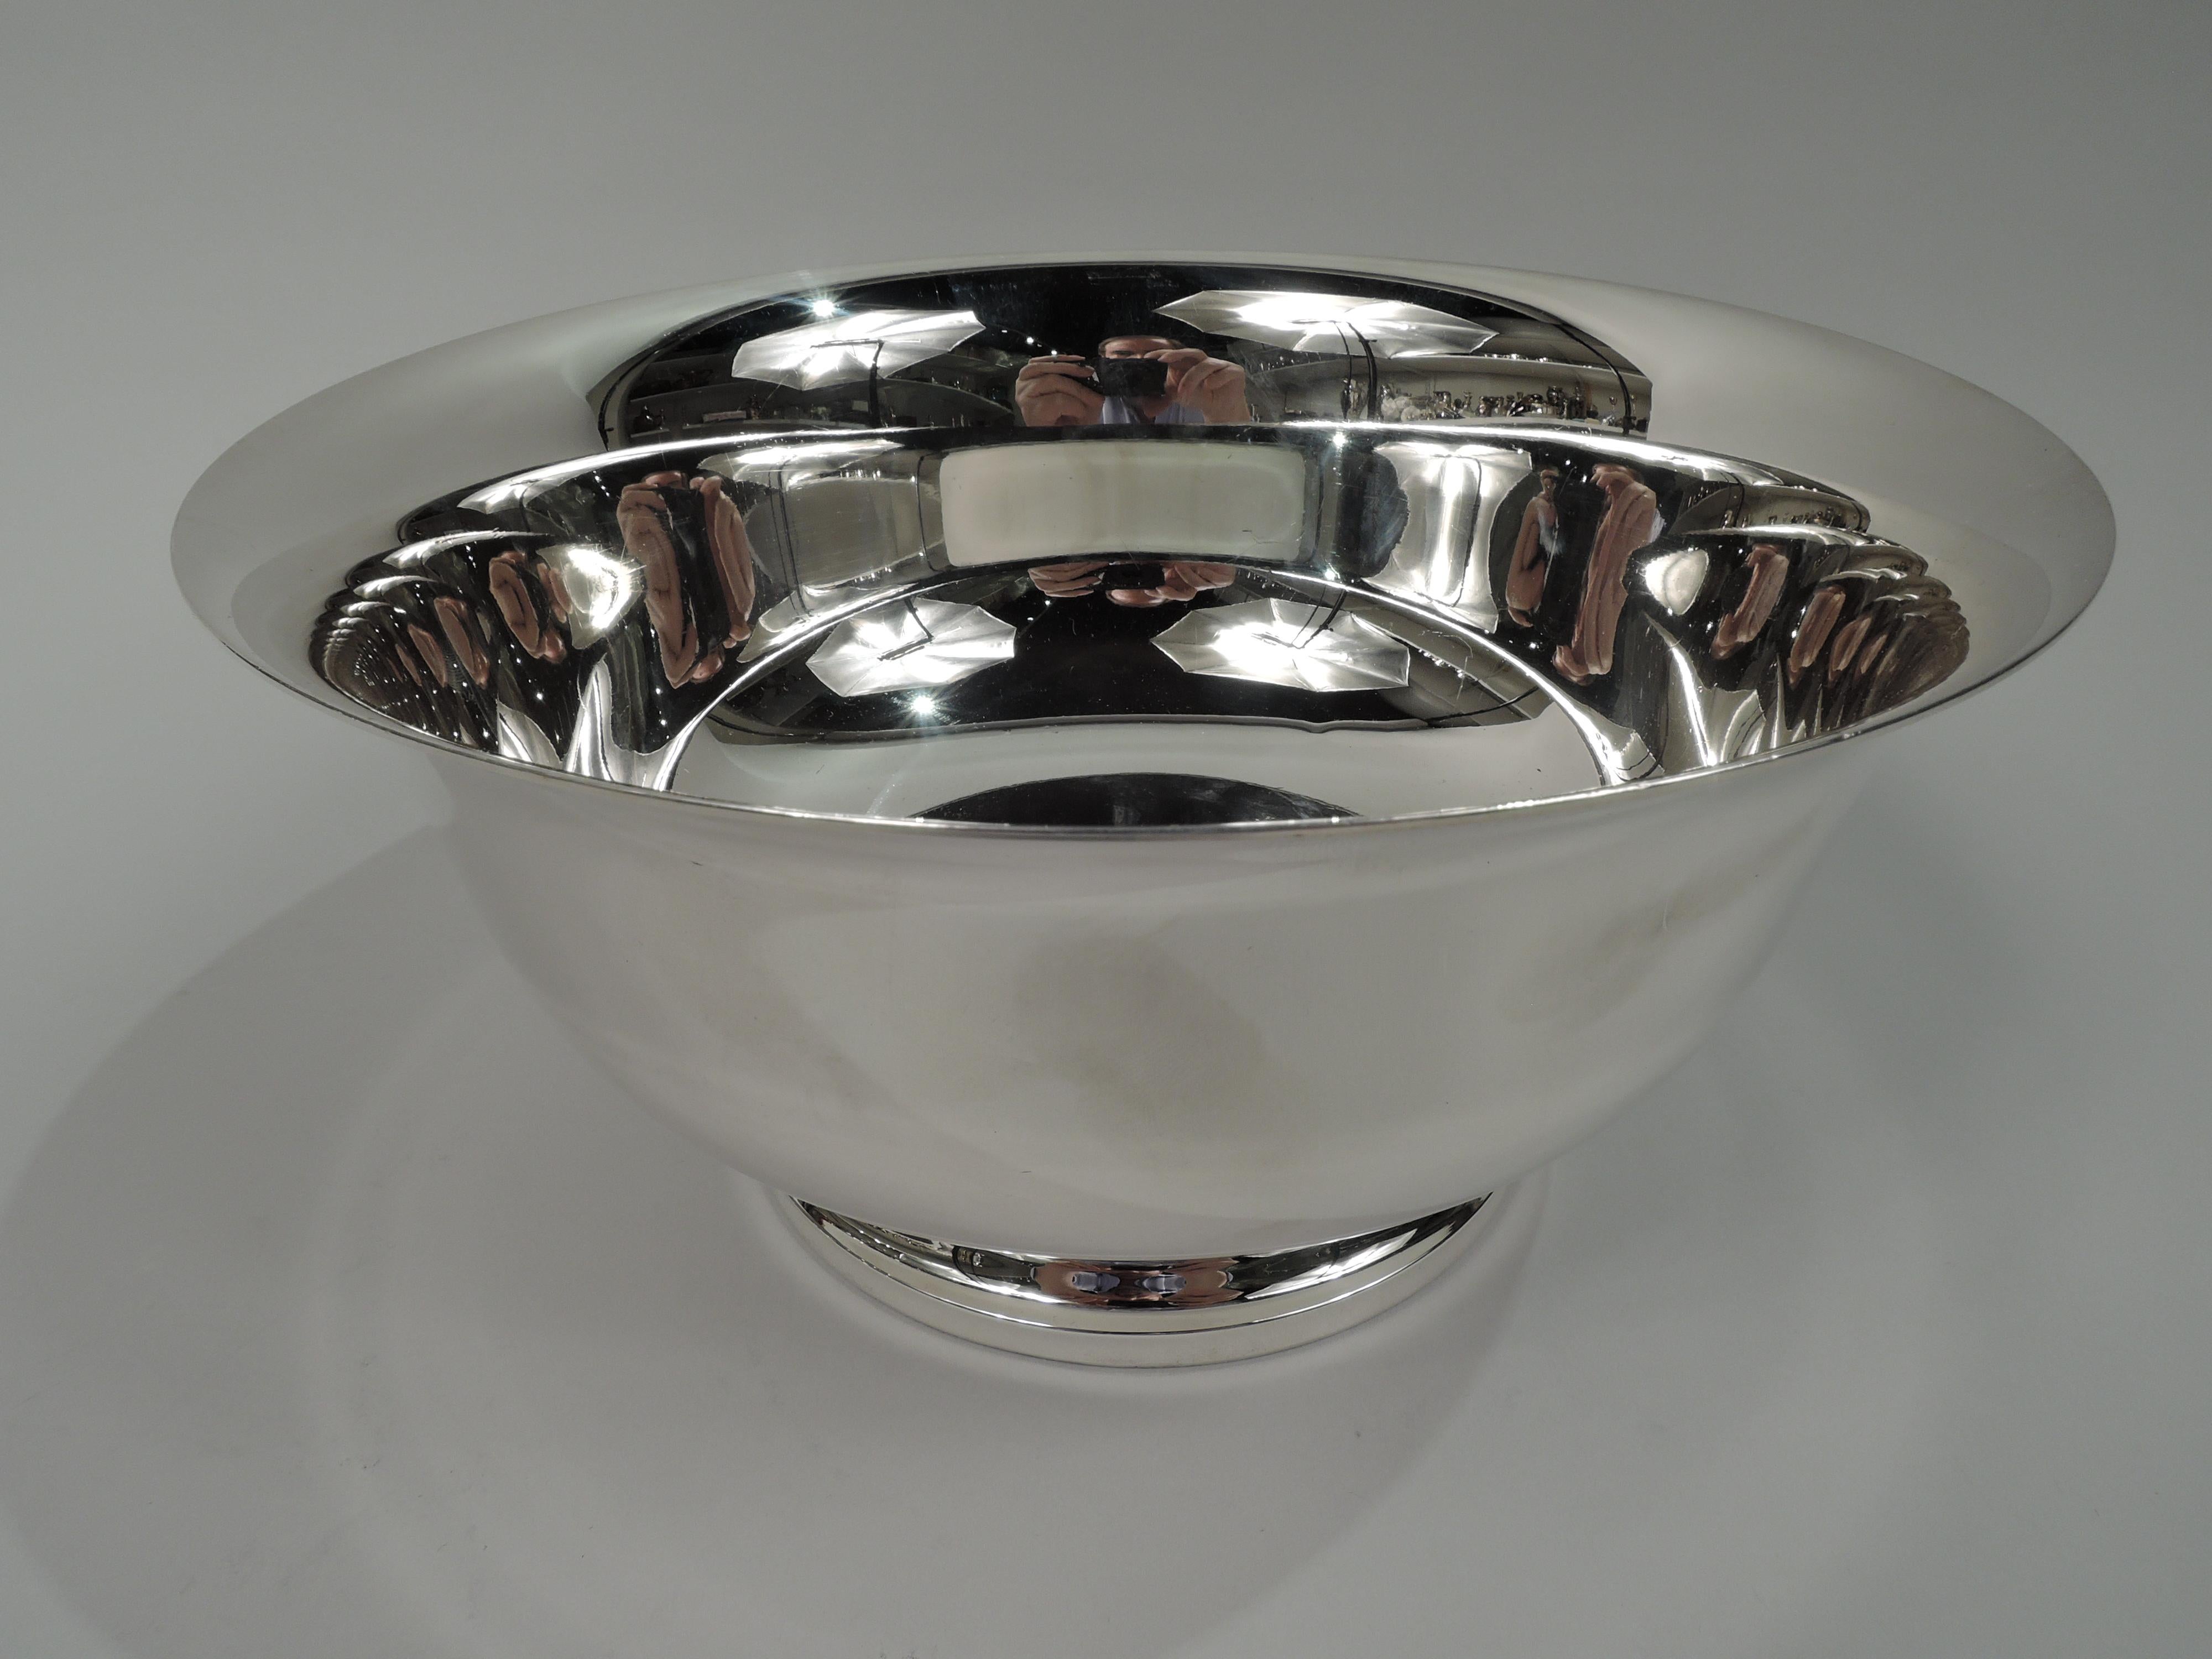 American Colonial sterling silver bowl. Retailed by Georg Jensen USA in New York. Revere form with Tapering sides, flared rim, and curved bottom; stepped foot. Traditional form with lots of room for engraving. Fully marked including retailer’s